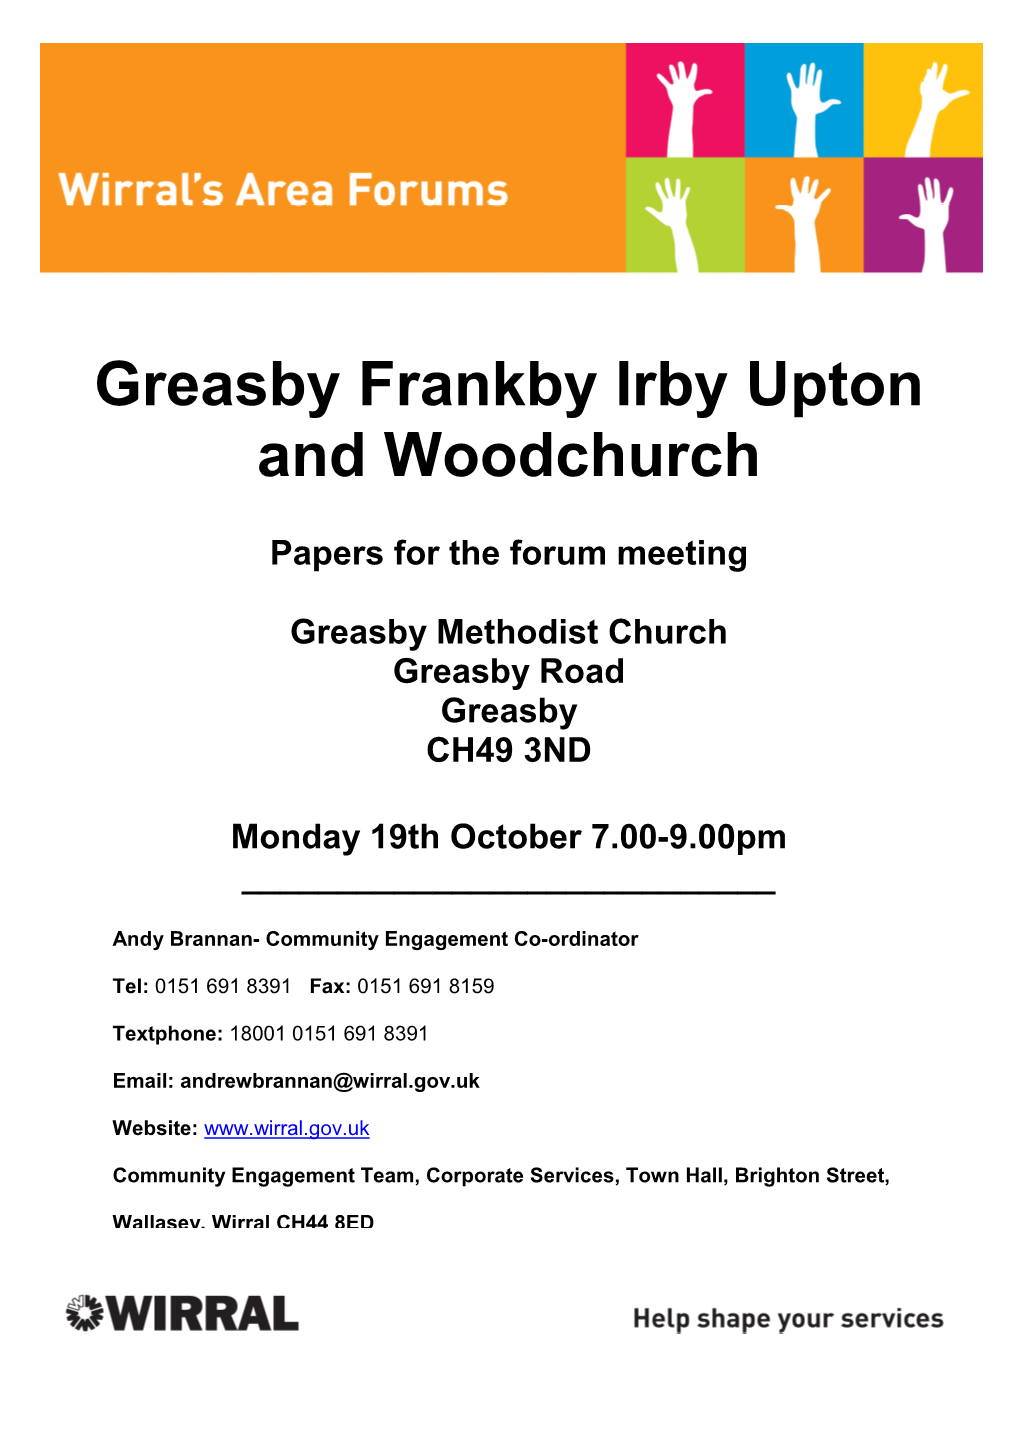 Greasby Frankby Irby Upton and Woodchurch